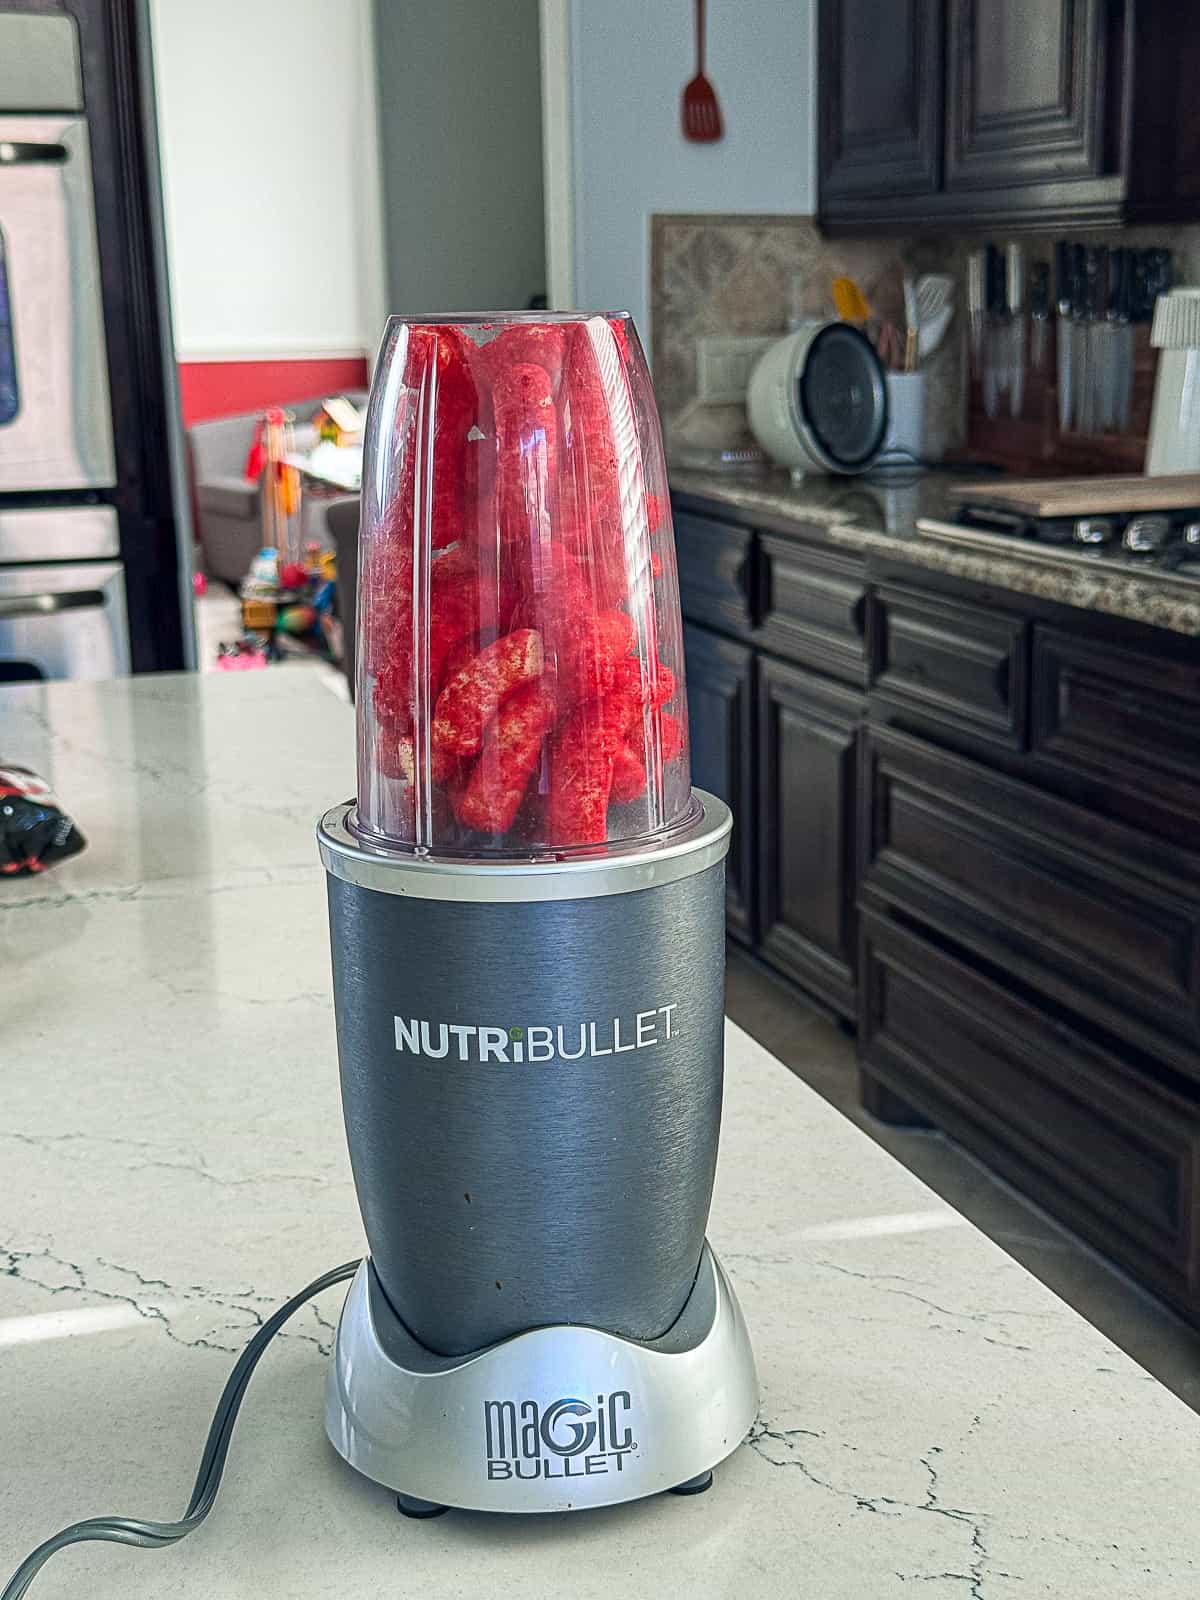 Puffed Flaming Hot Cheetos in a Nutribullet